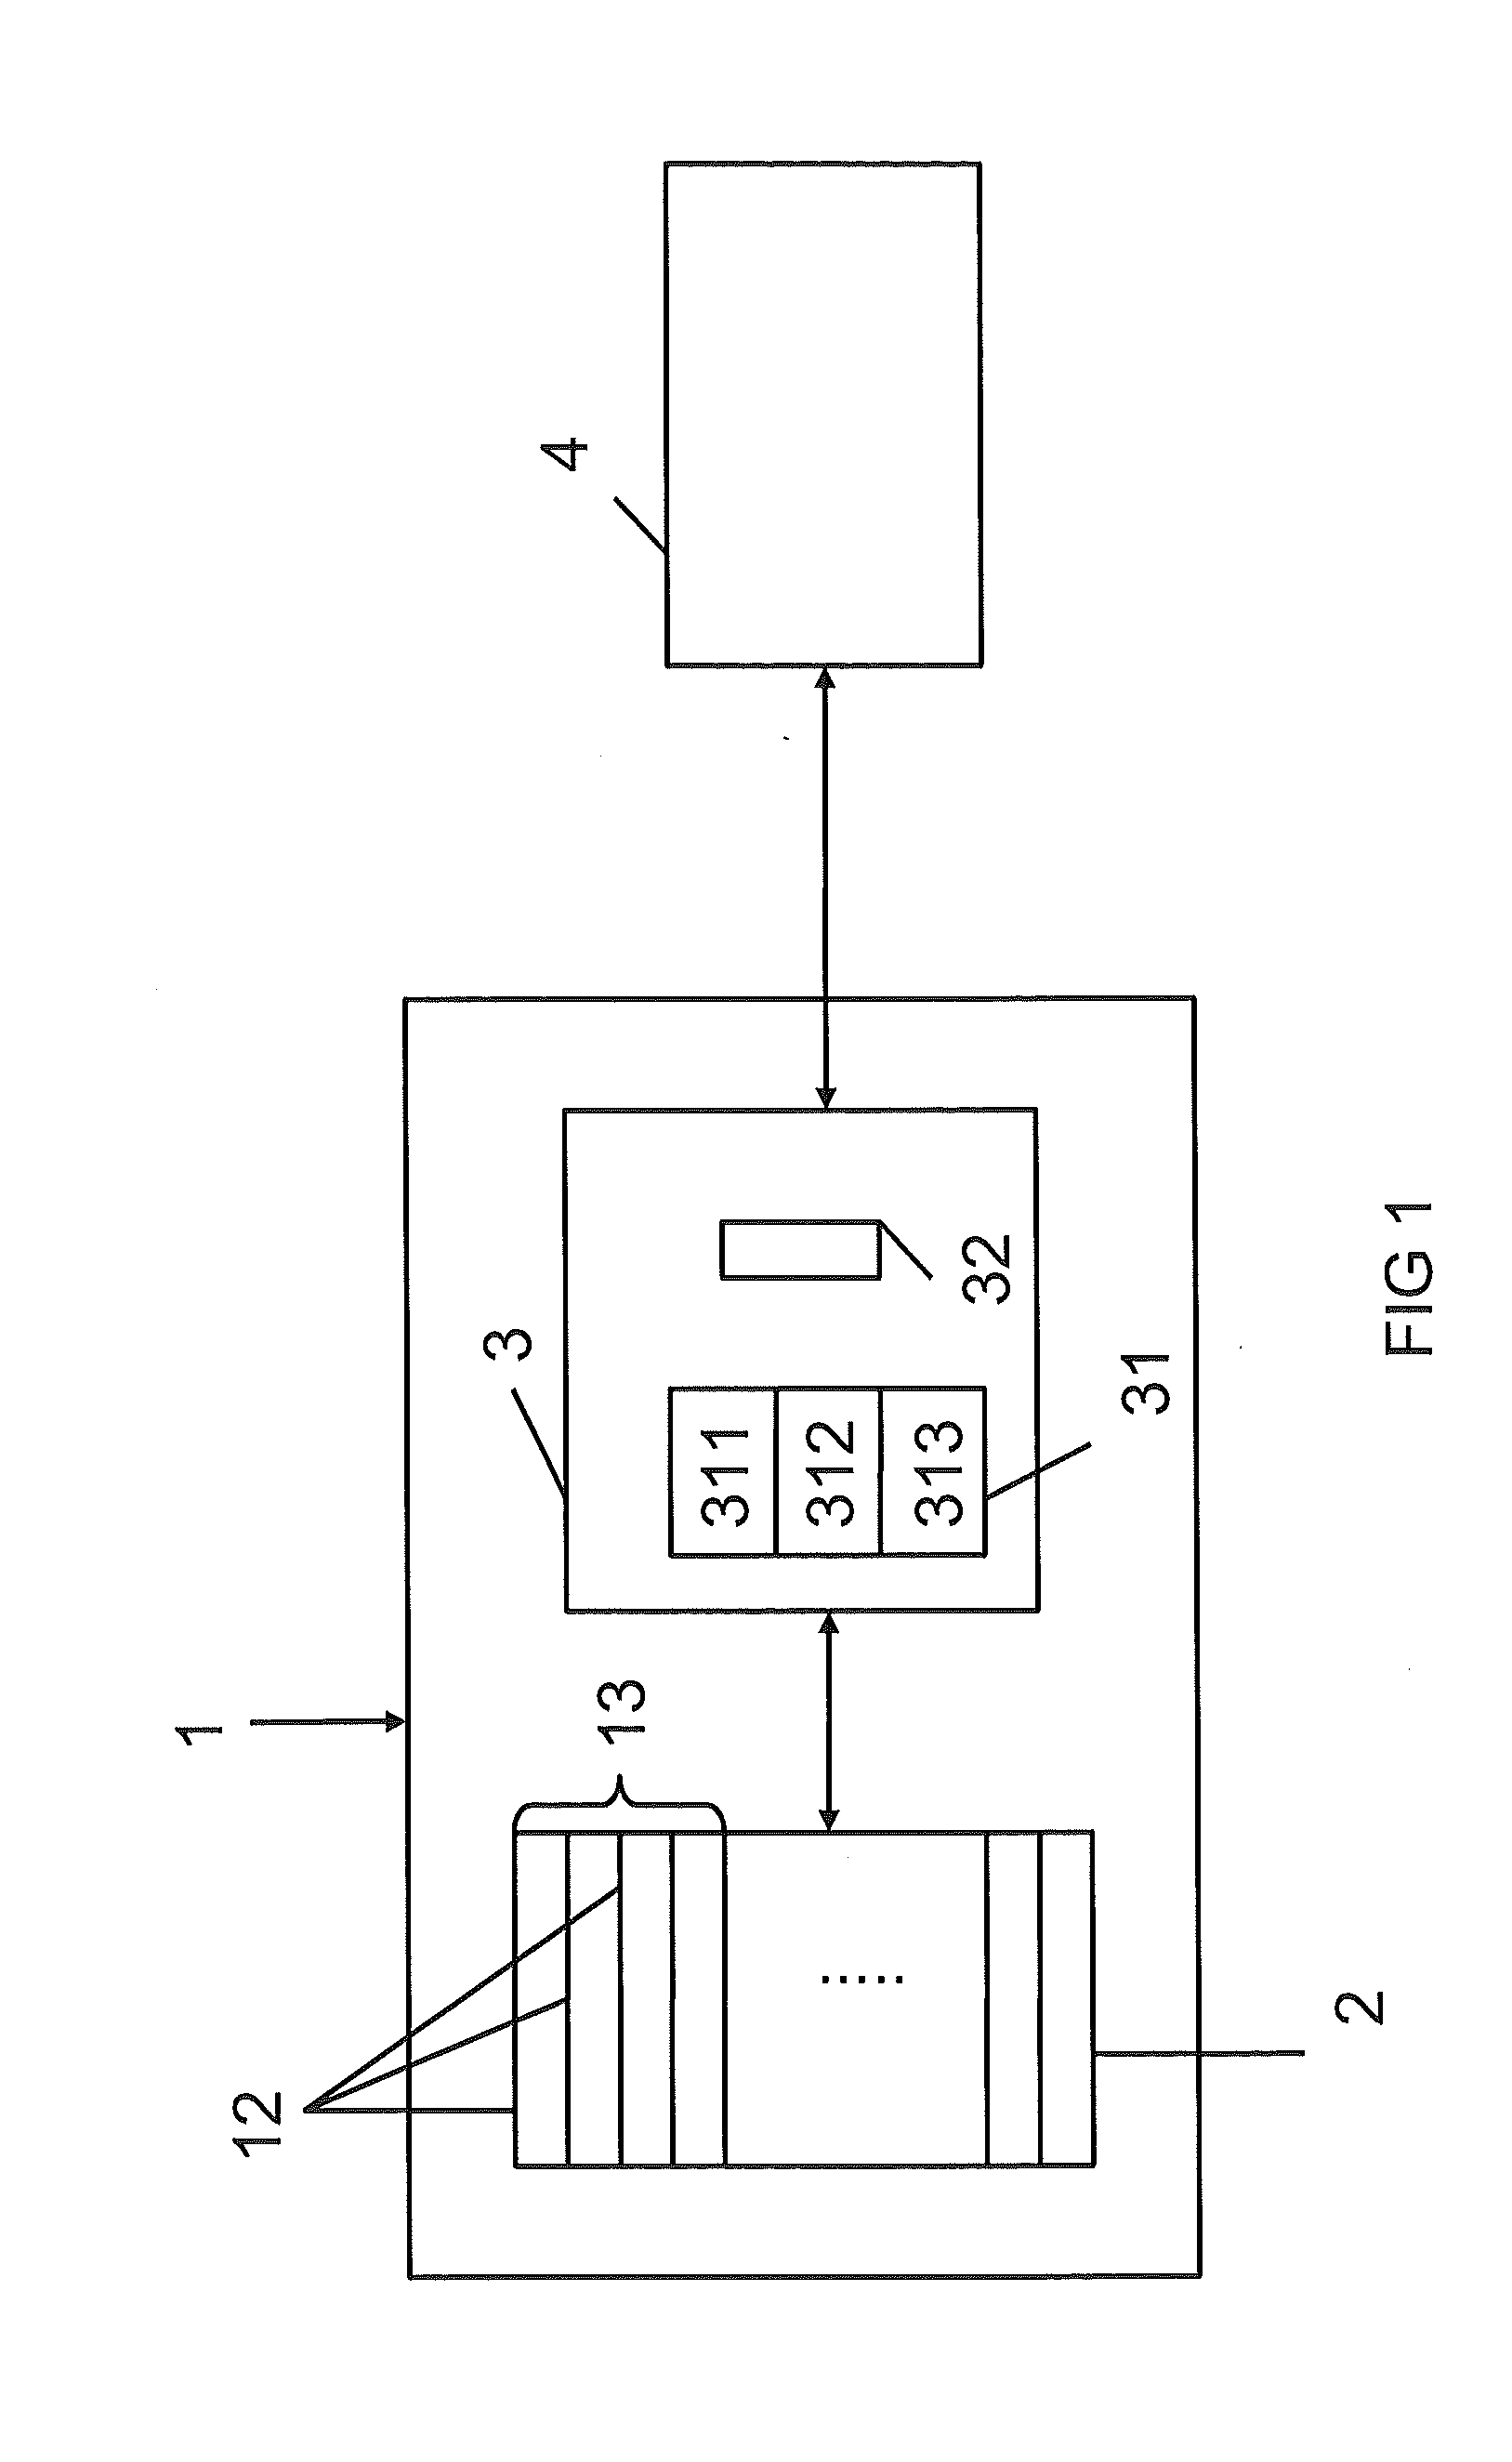 Logical to physical address mapping in storage systems comprising solid state memory devices